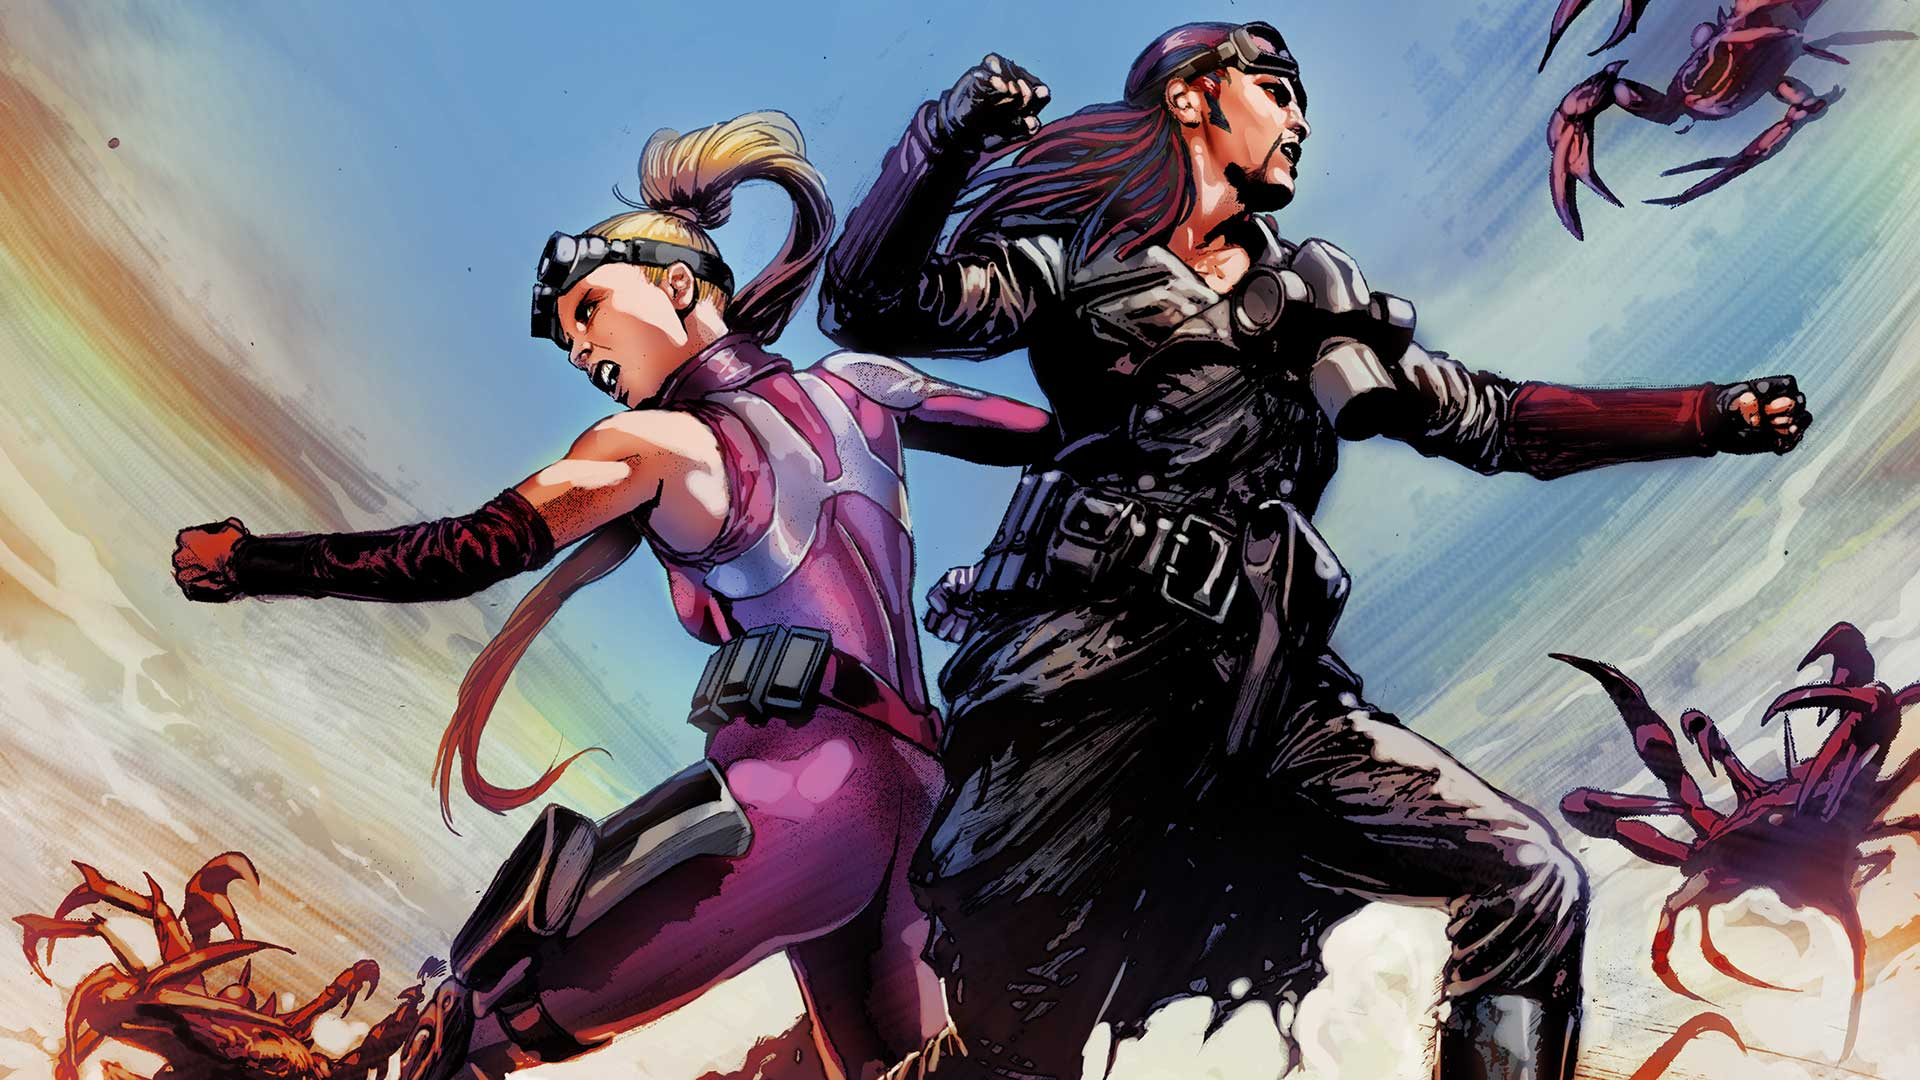 Penelope Pitstop (left) and Dick Dasterdly (right) fight monsters on the cover of Wacky Raceland #3. 